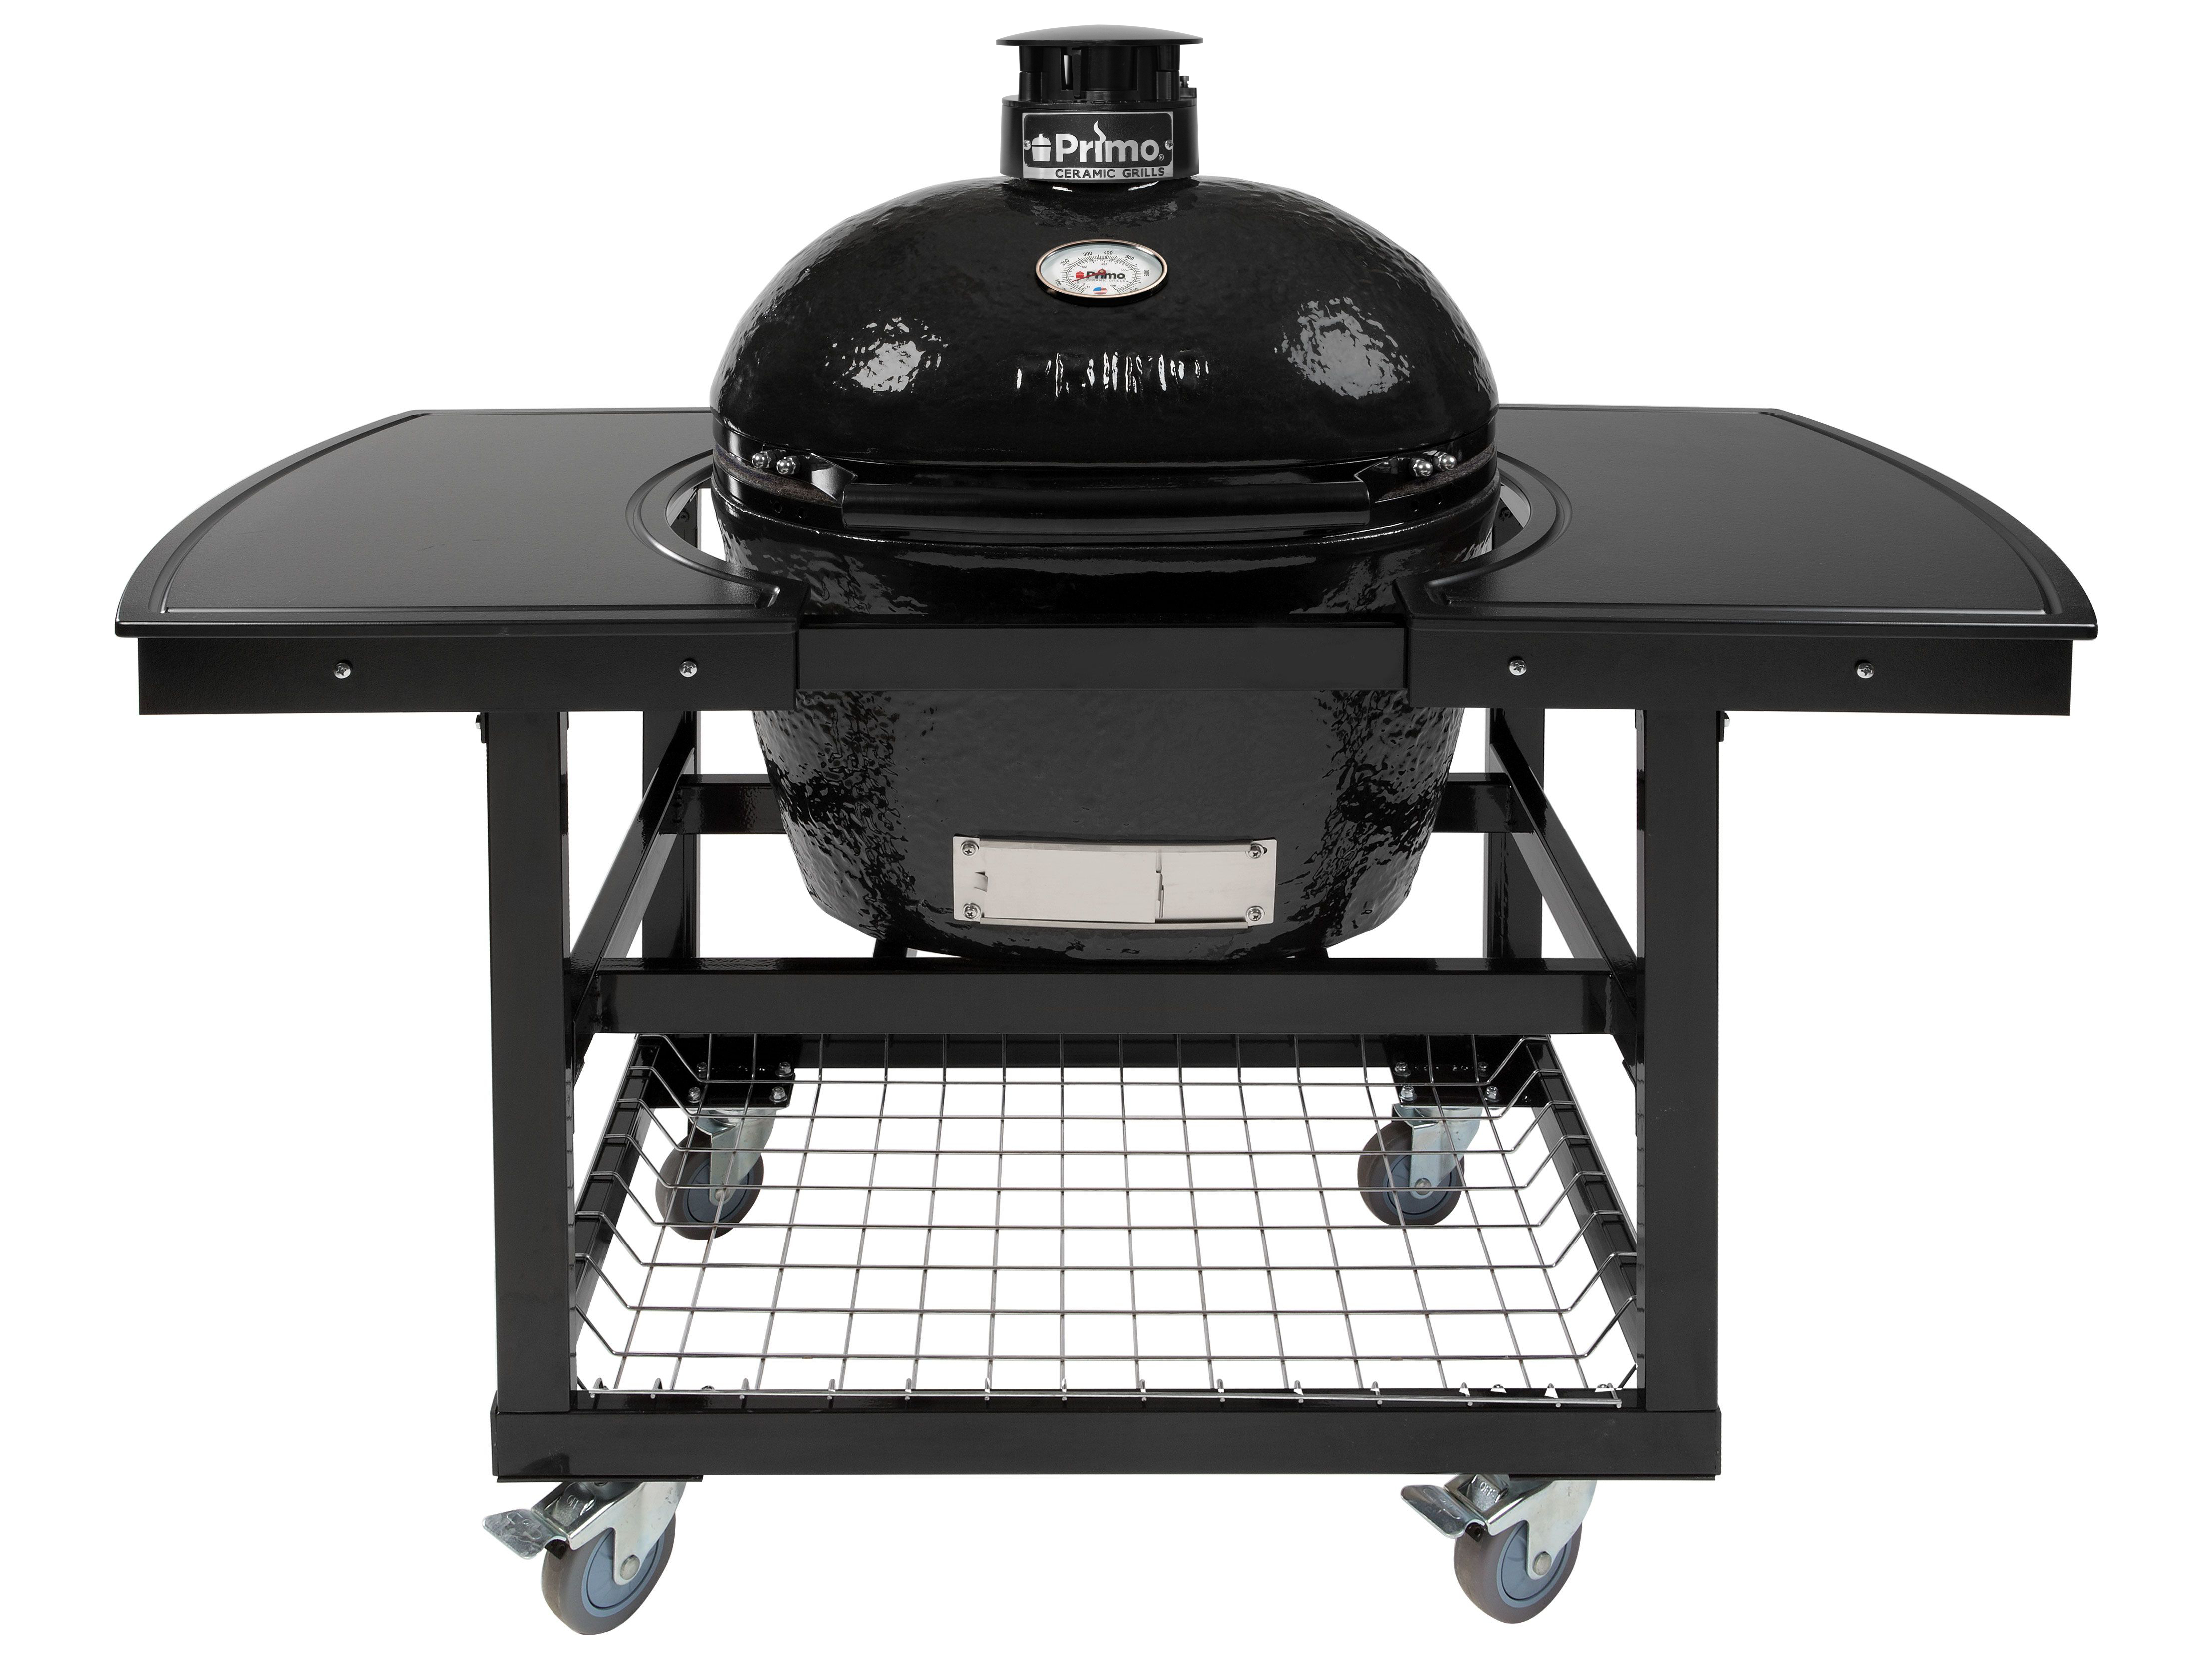 woonadres Consequent Huiswerk maken Primo Oval XL Jack Daniels Edition Charcoal Grill with Cart and Island Top  | PMPGCXLHJPG00311PG00368